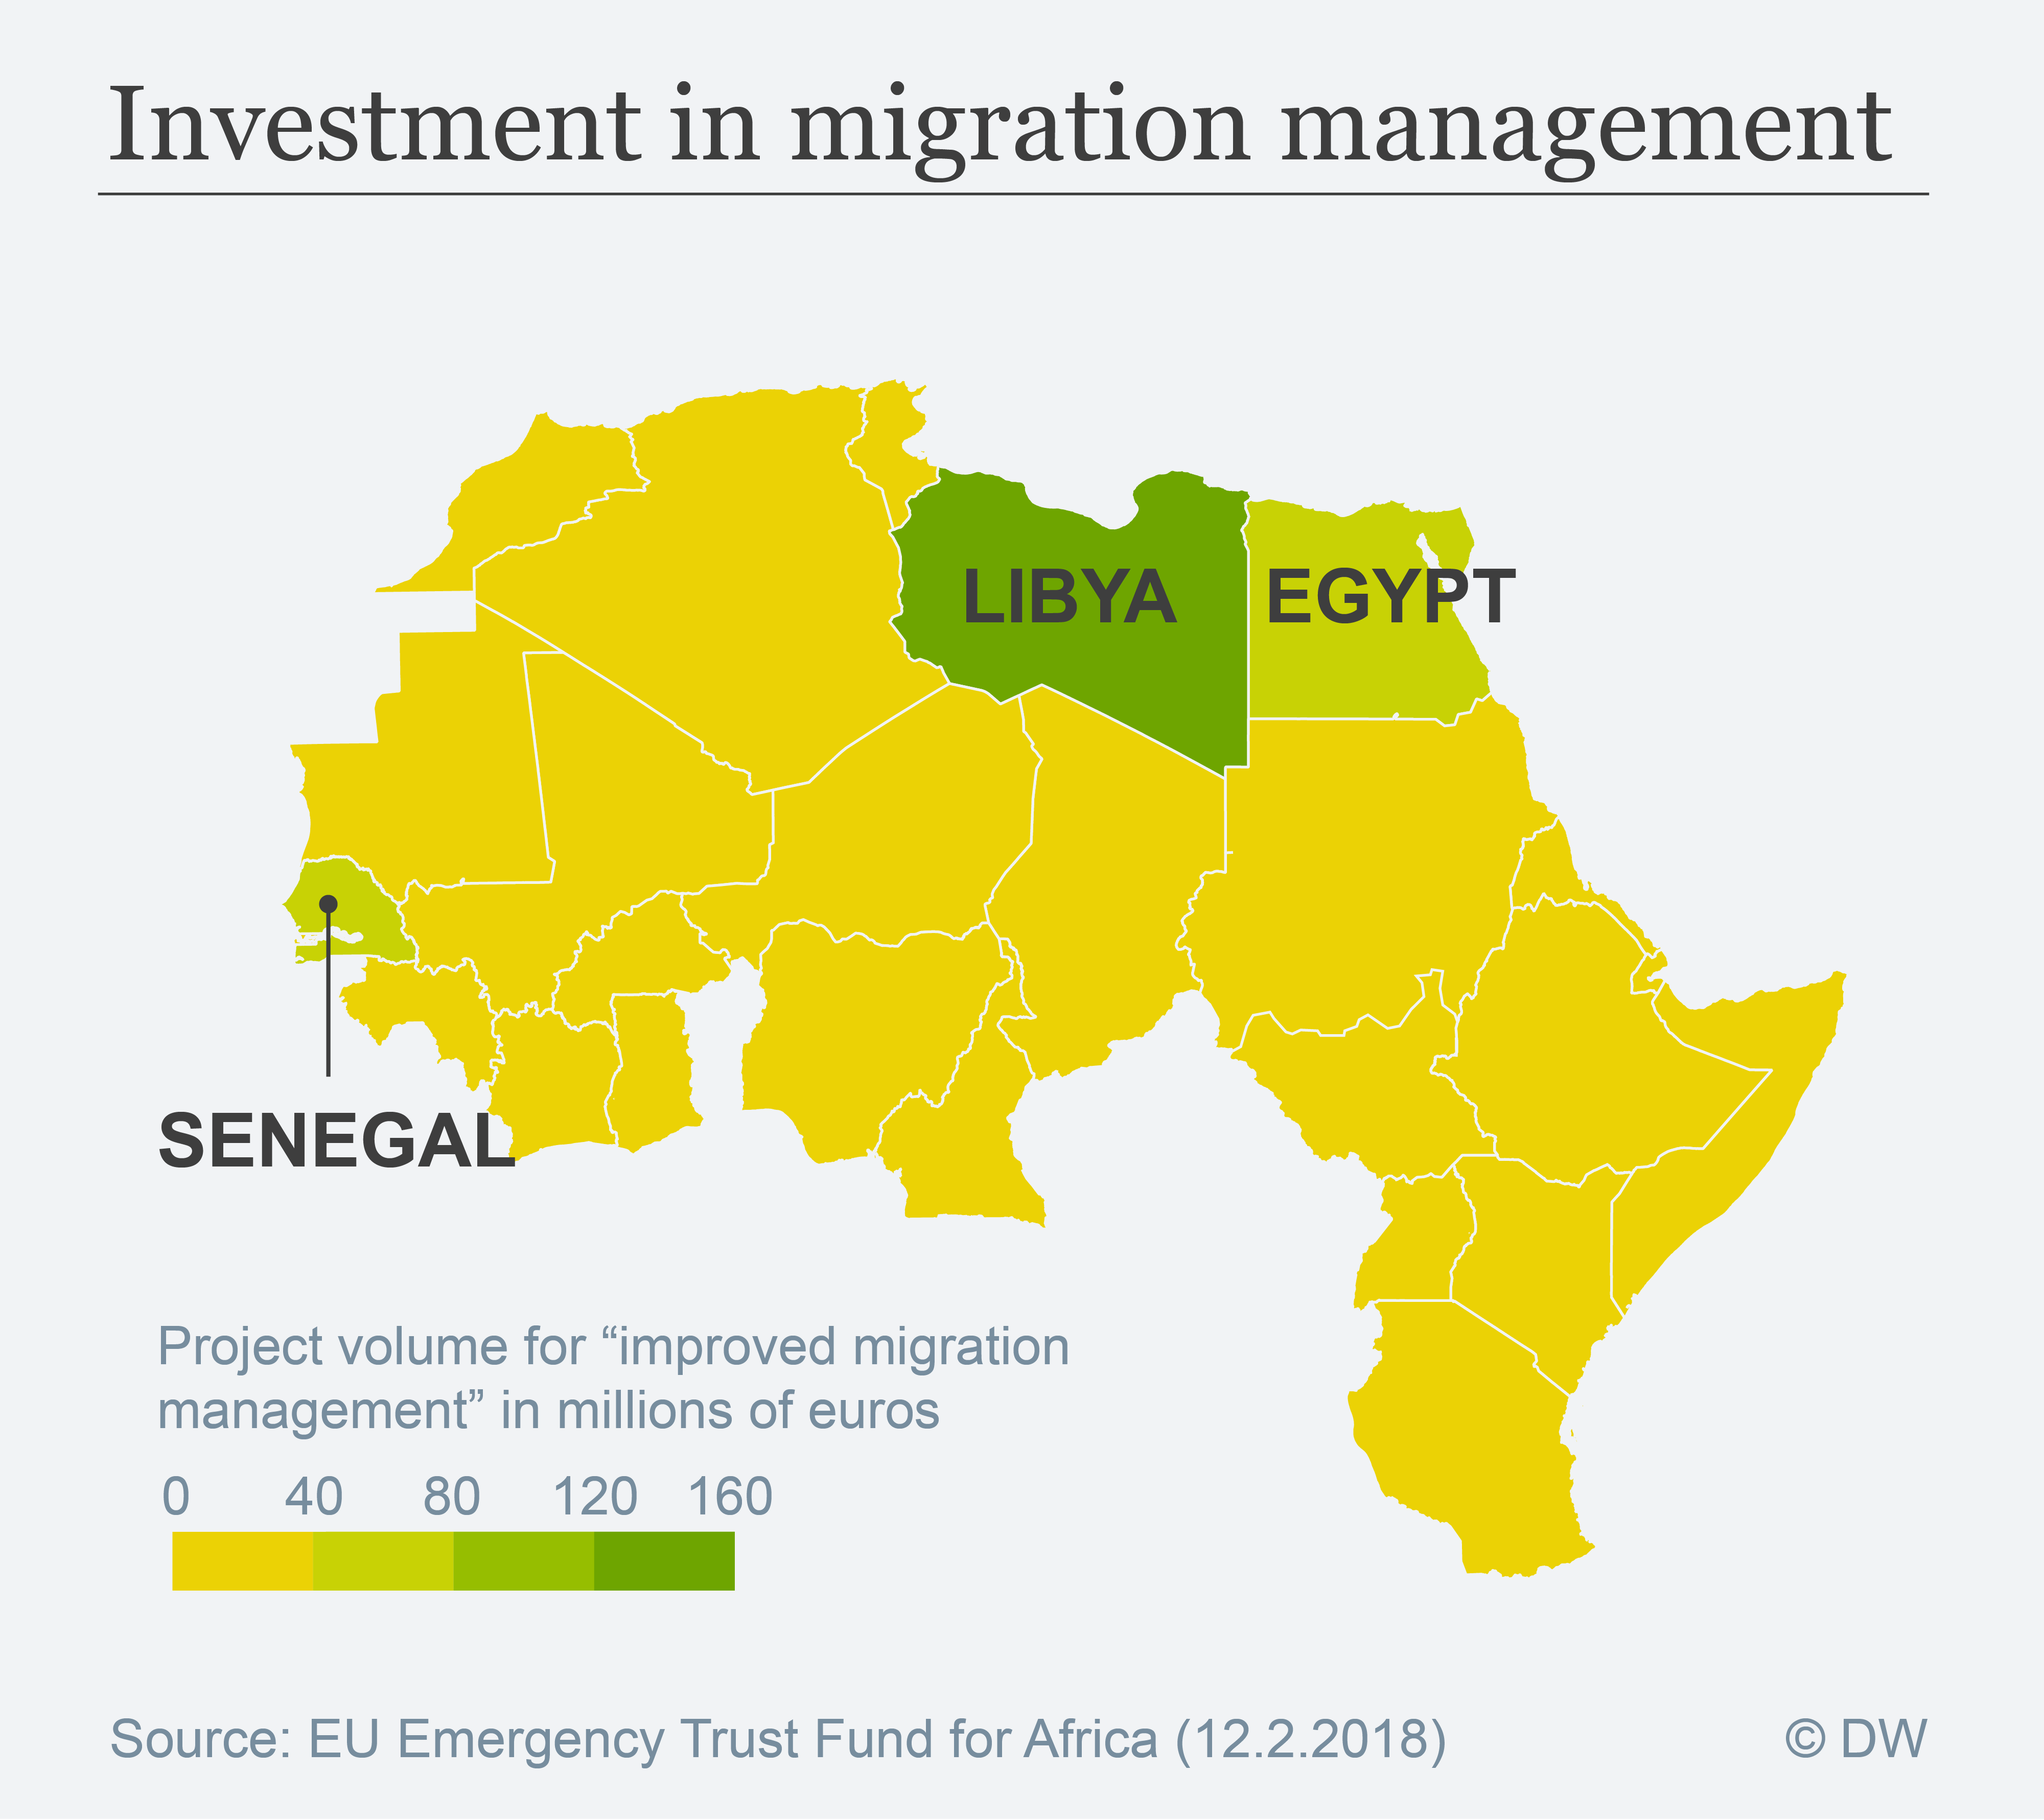 Data visualization: Investment in migration management